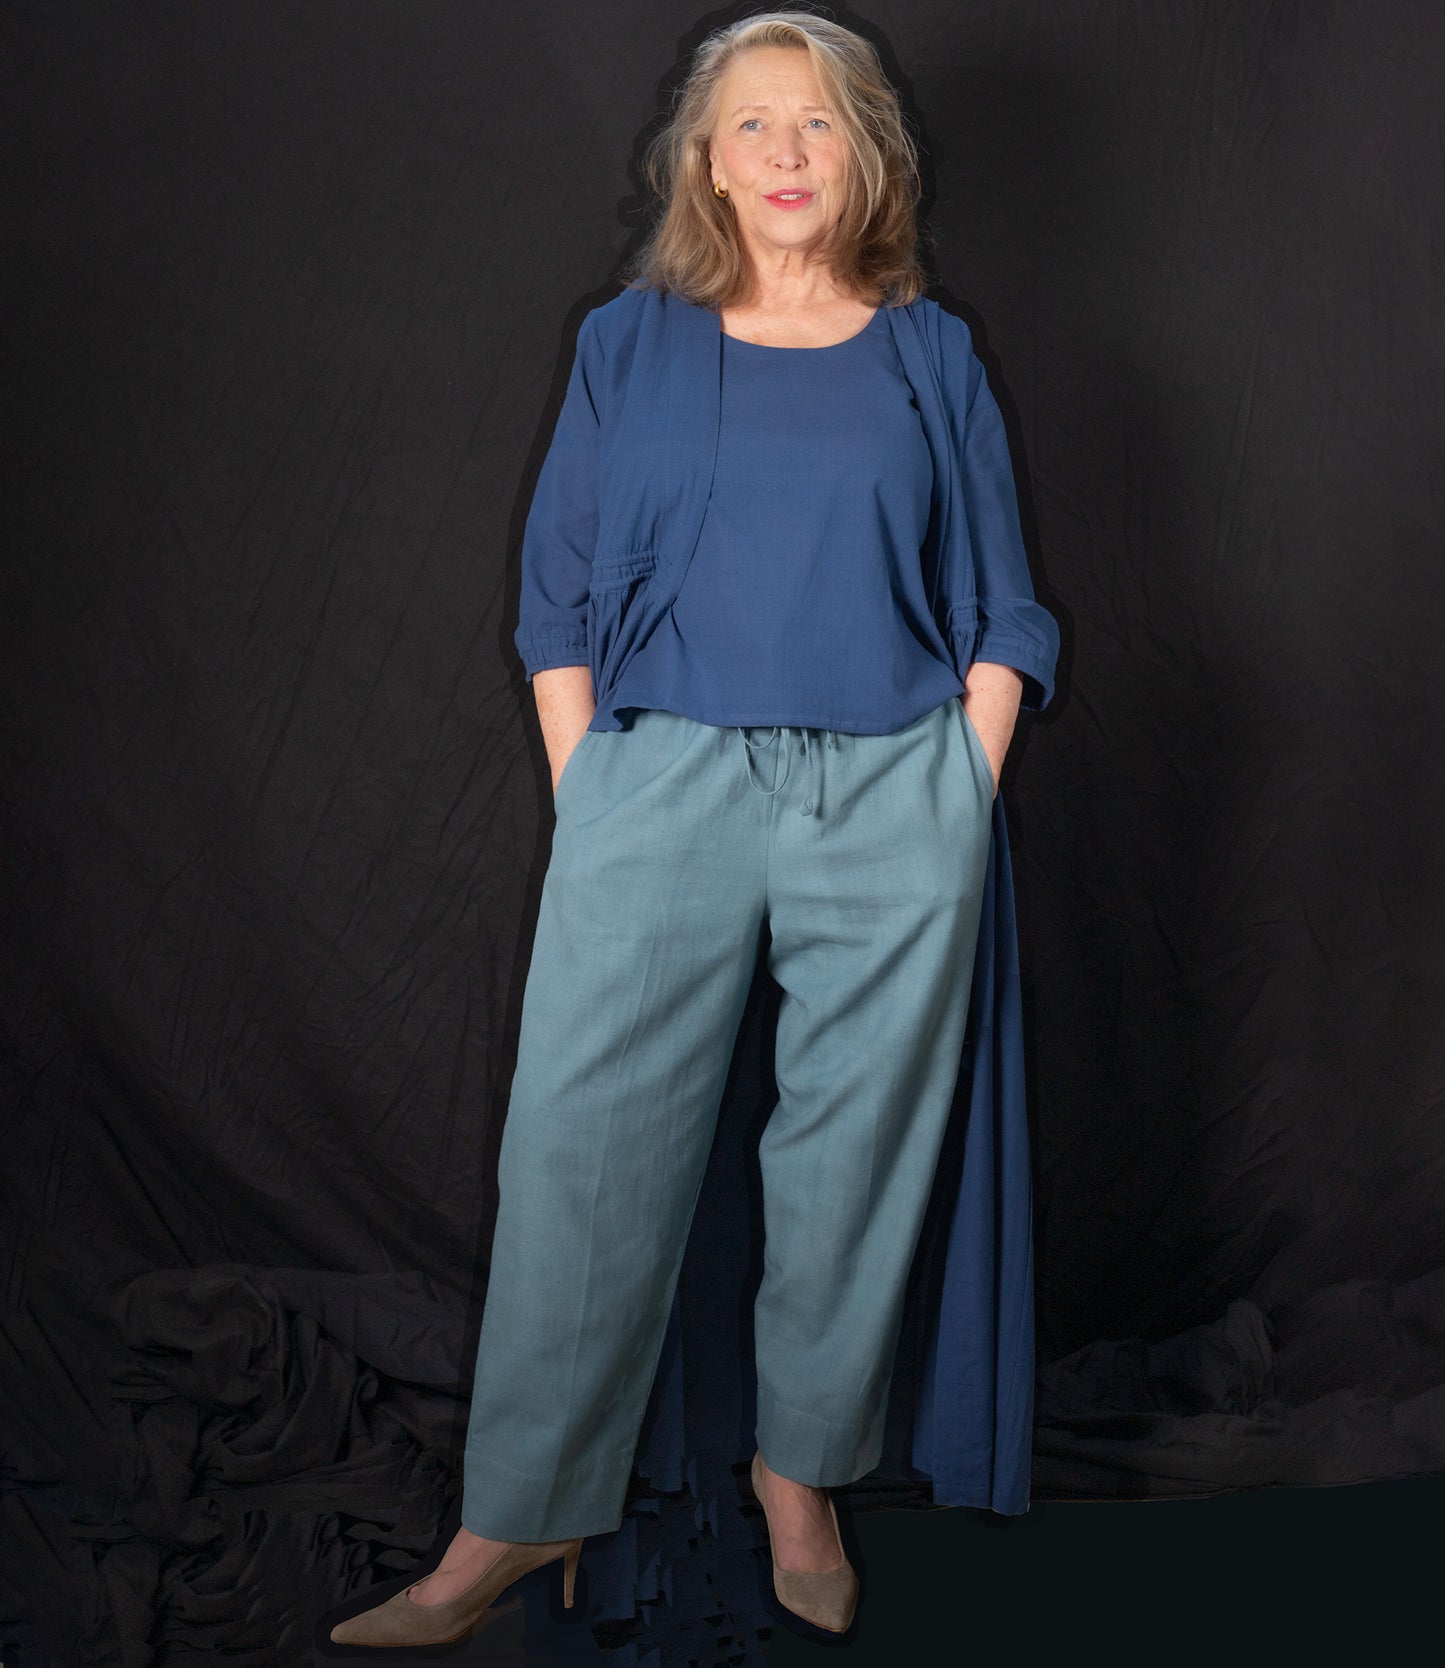 Cotton trousers in two shades of indigo available